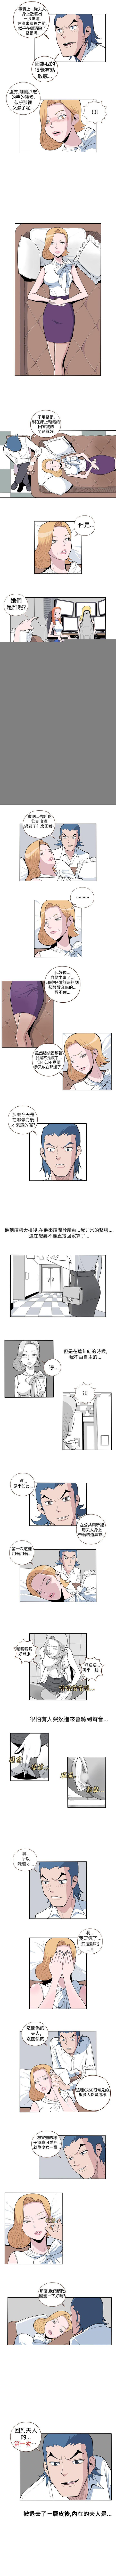 18yearsold 淫亂魔鬼 1-29 Eng Sub - Page 4